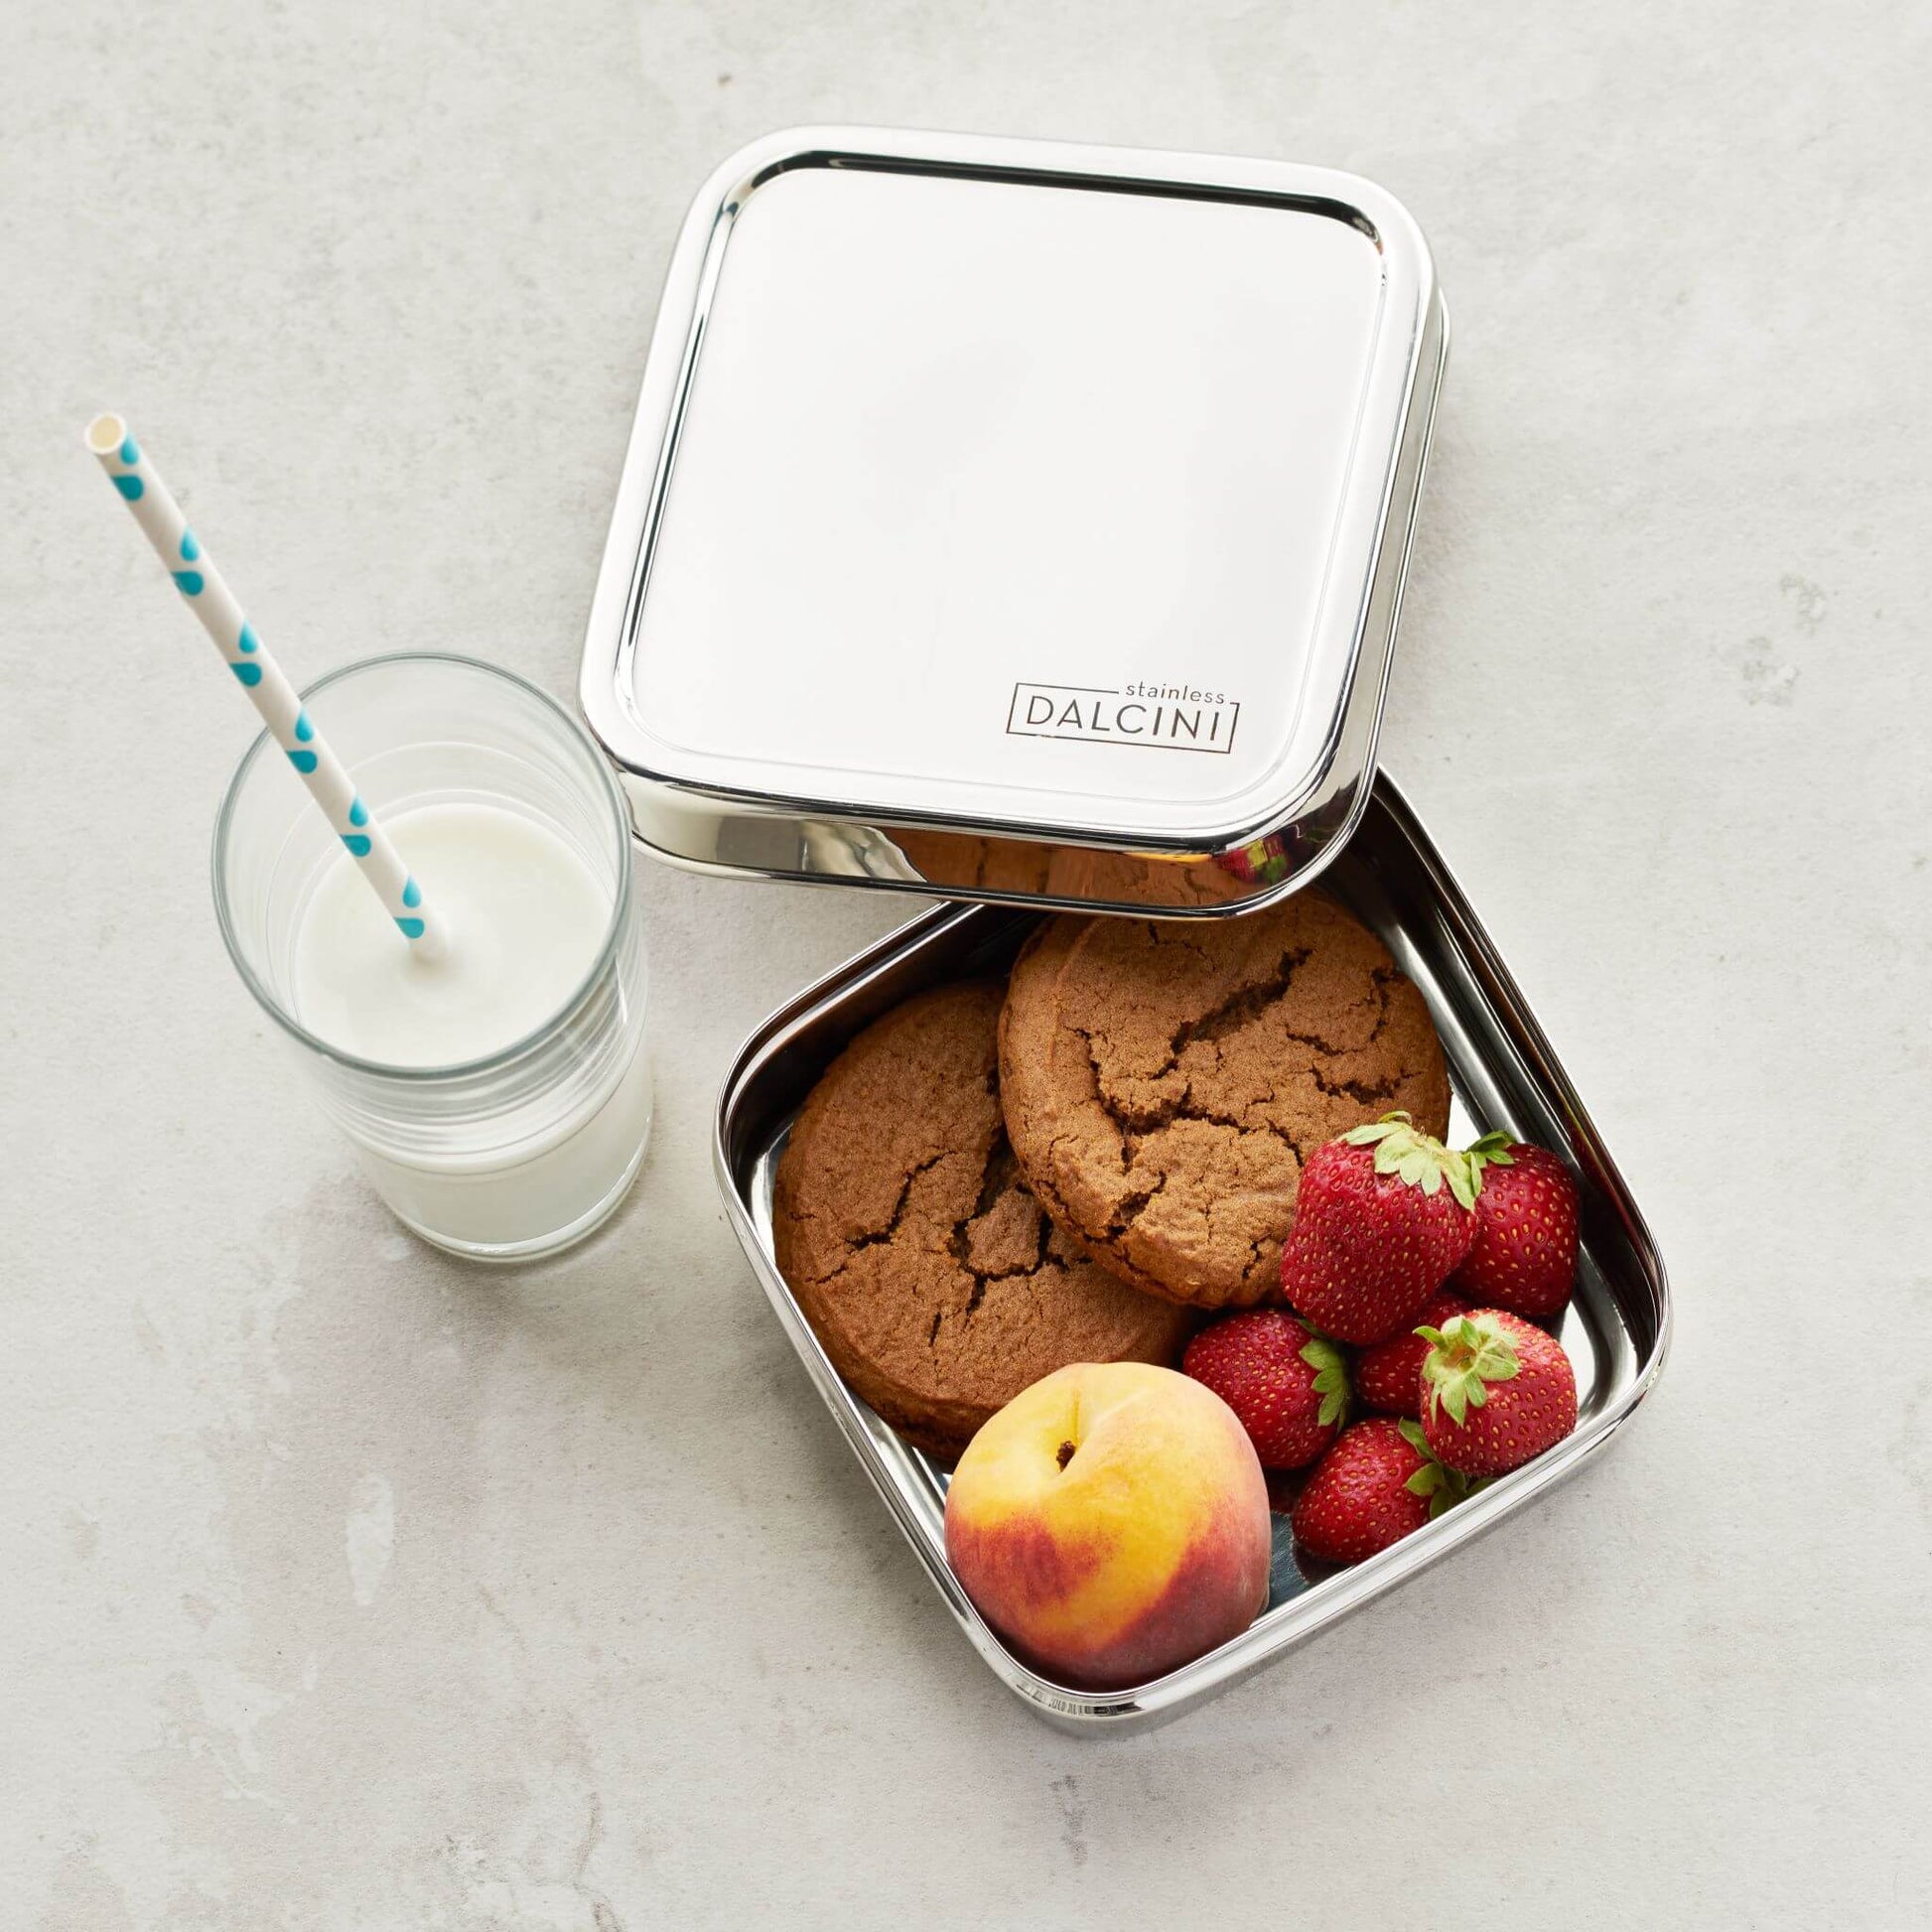 Cookies, strawberries, and peach in square stainless steel sandwich box with lid